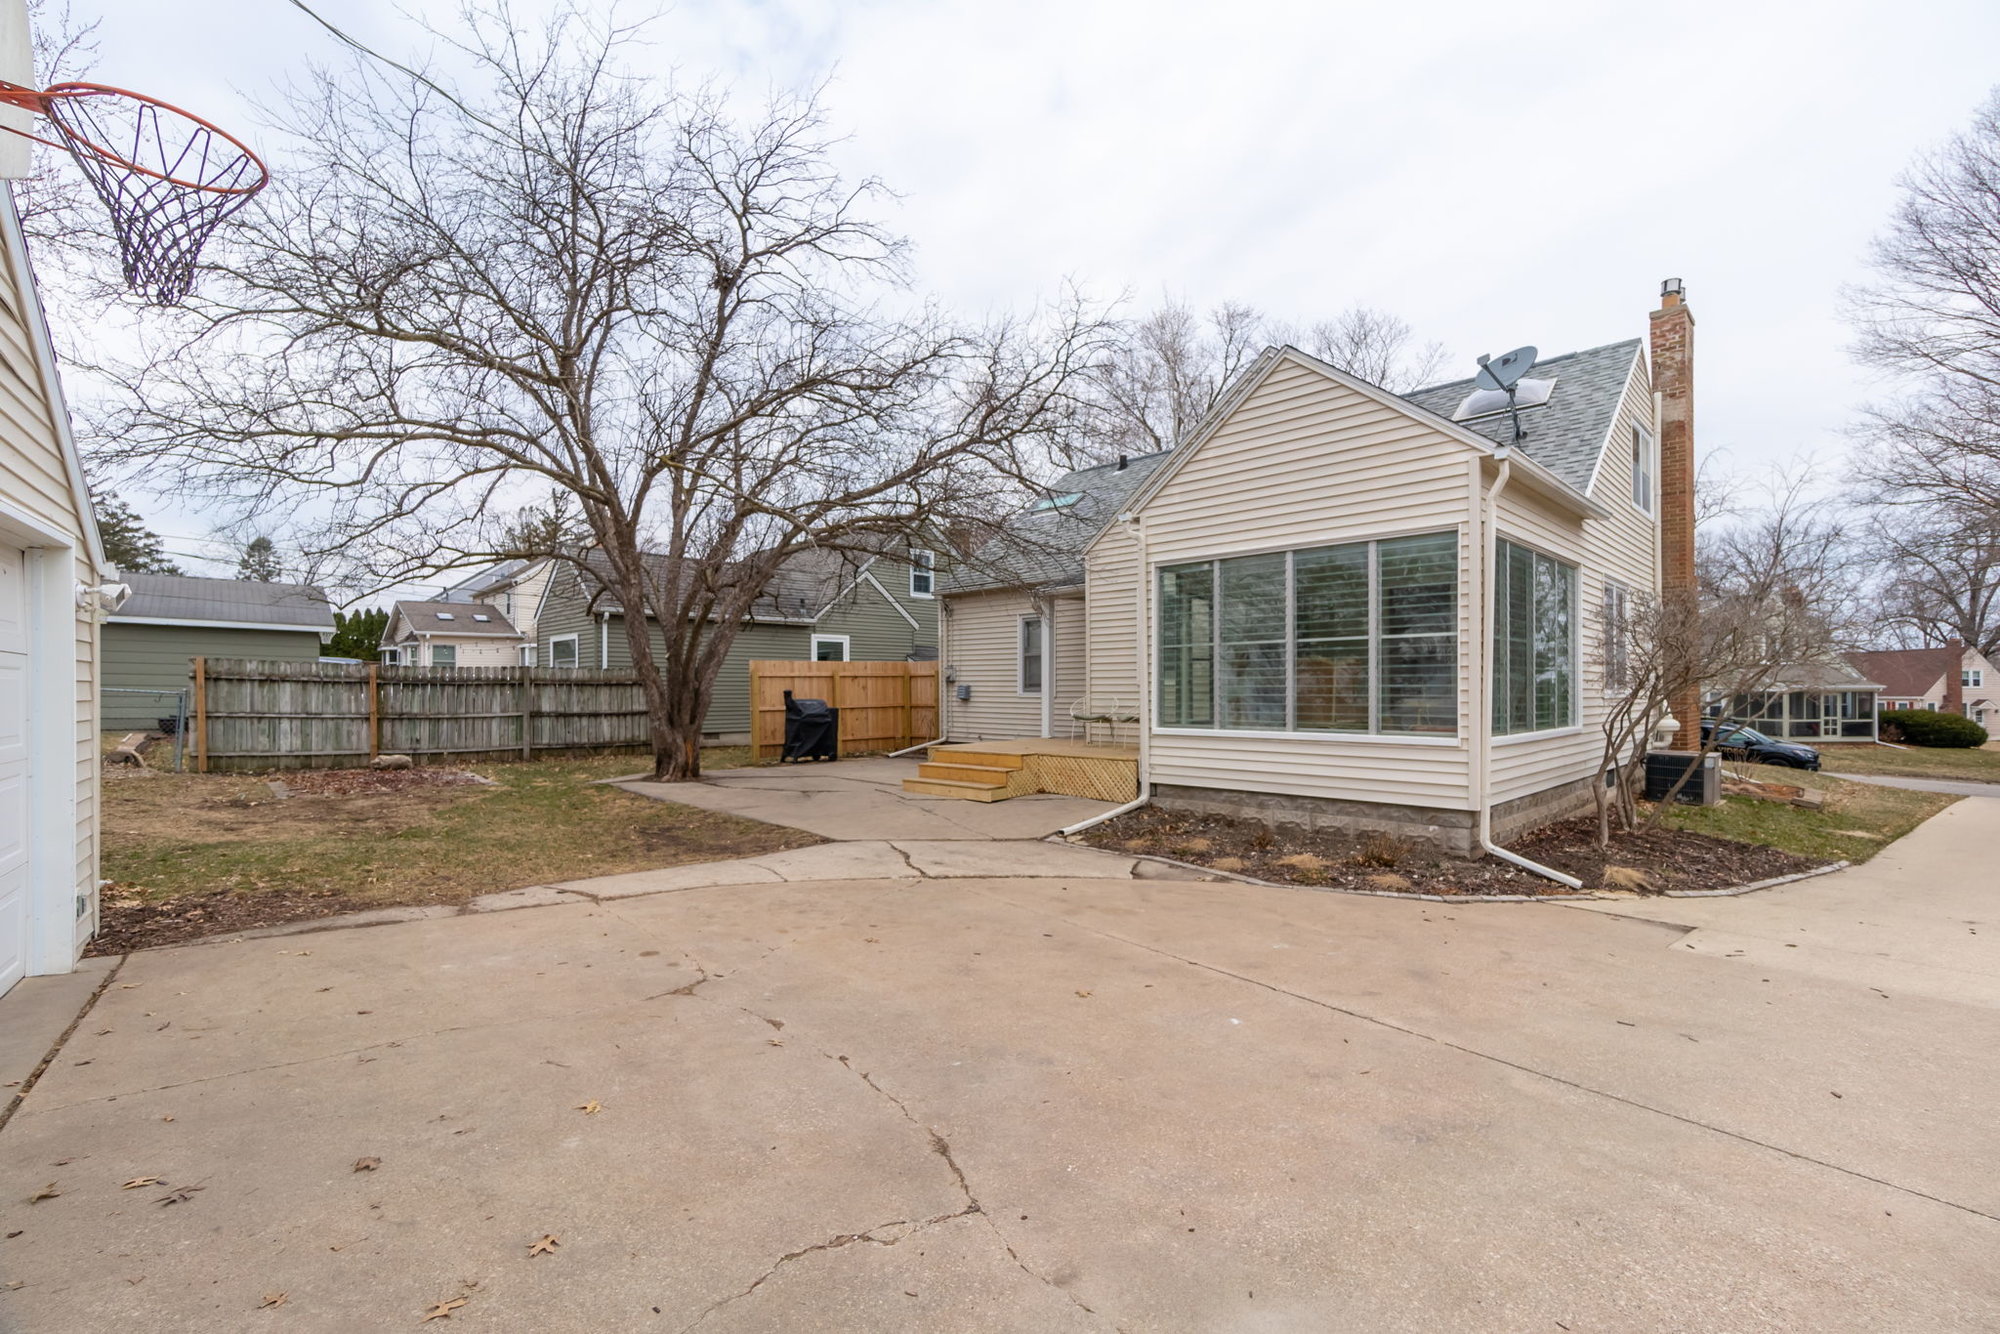 Check Out this Darling Derbyshire Home in Waterloo Iowa